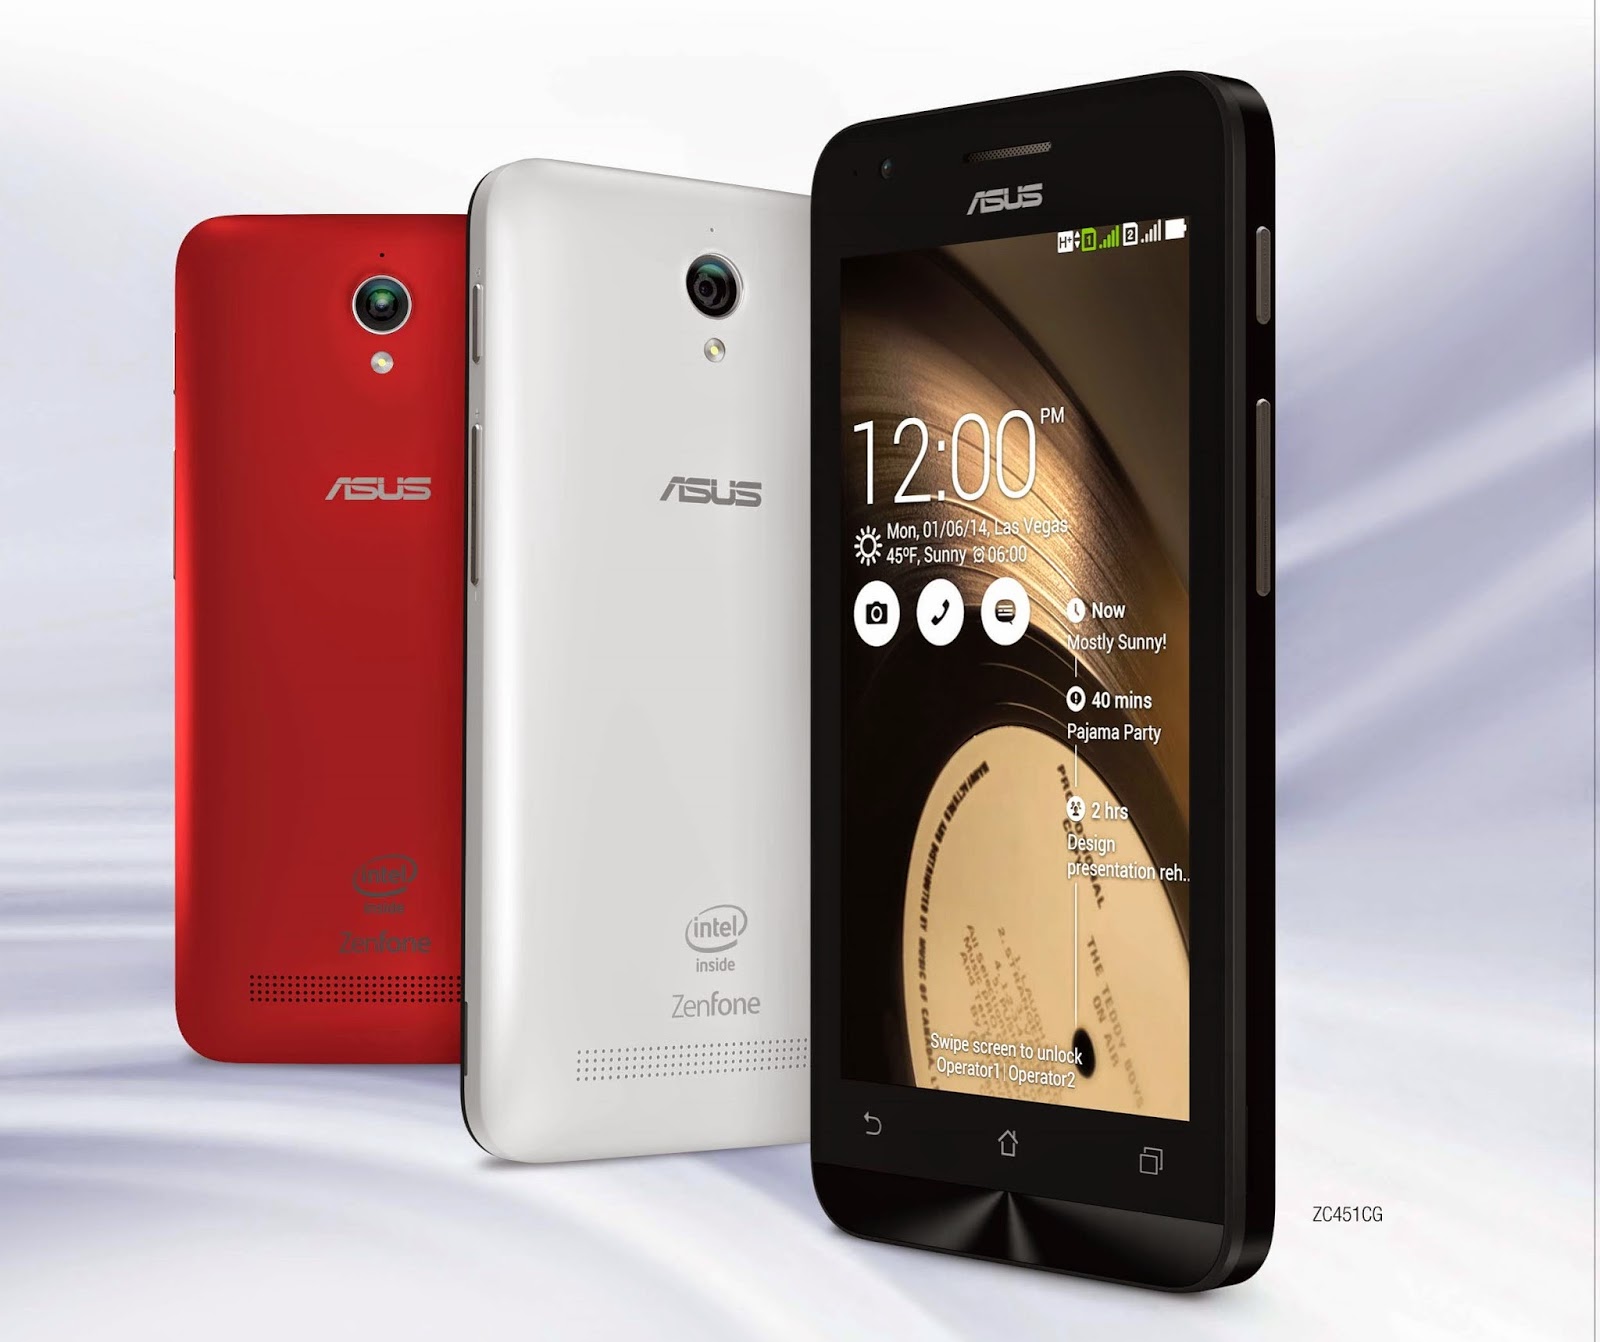 ASUS ZenFone C launches in Taiwan - Targets Entry level Smartphone